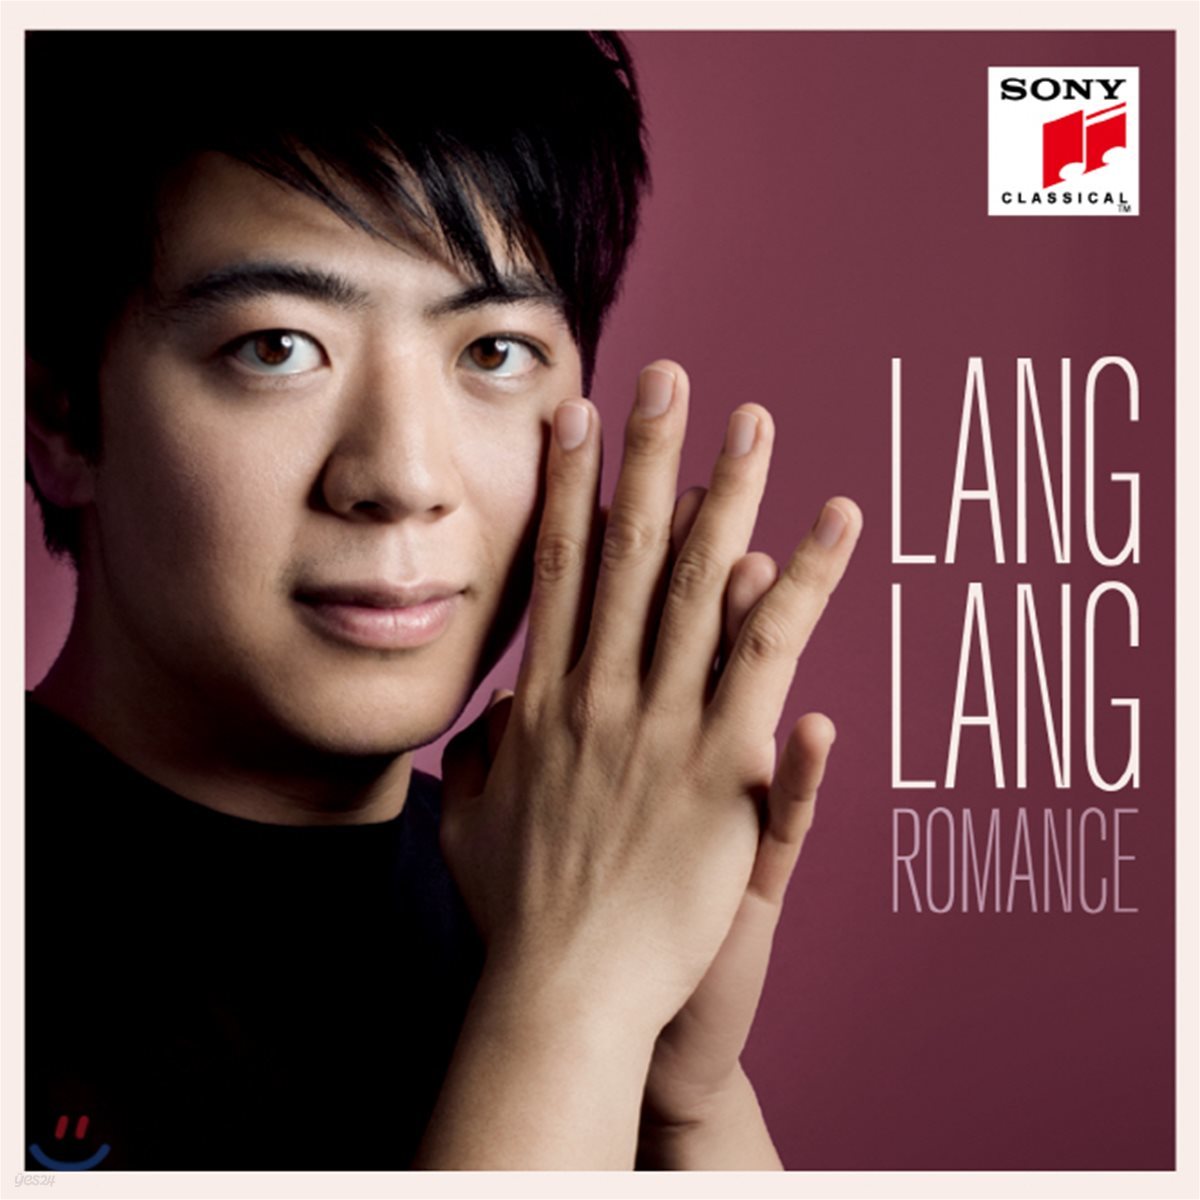 Lang Lang 랑랑 - 로망스 (Romance: The Most Beautiful & Romantic Works for Piano)